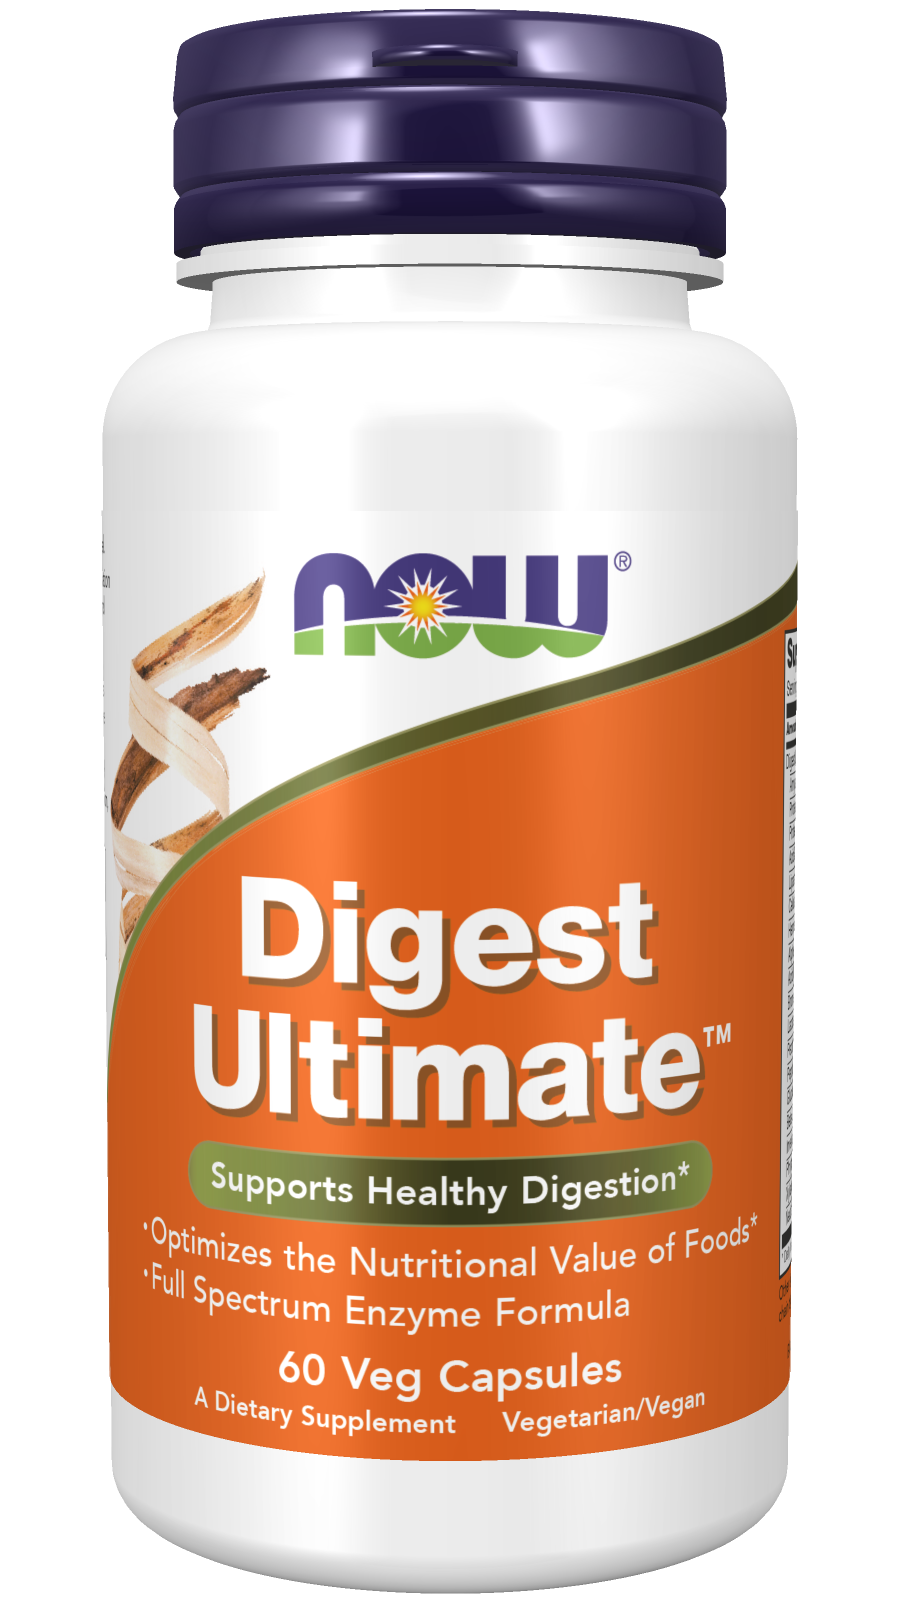 NOW Foods - Digest Ultimate #2965